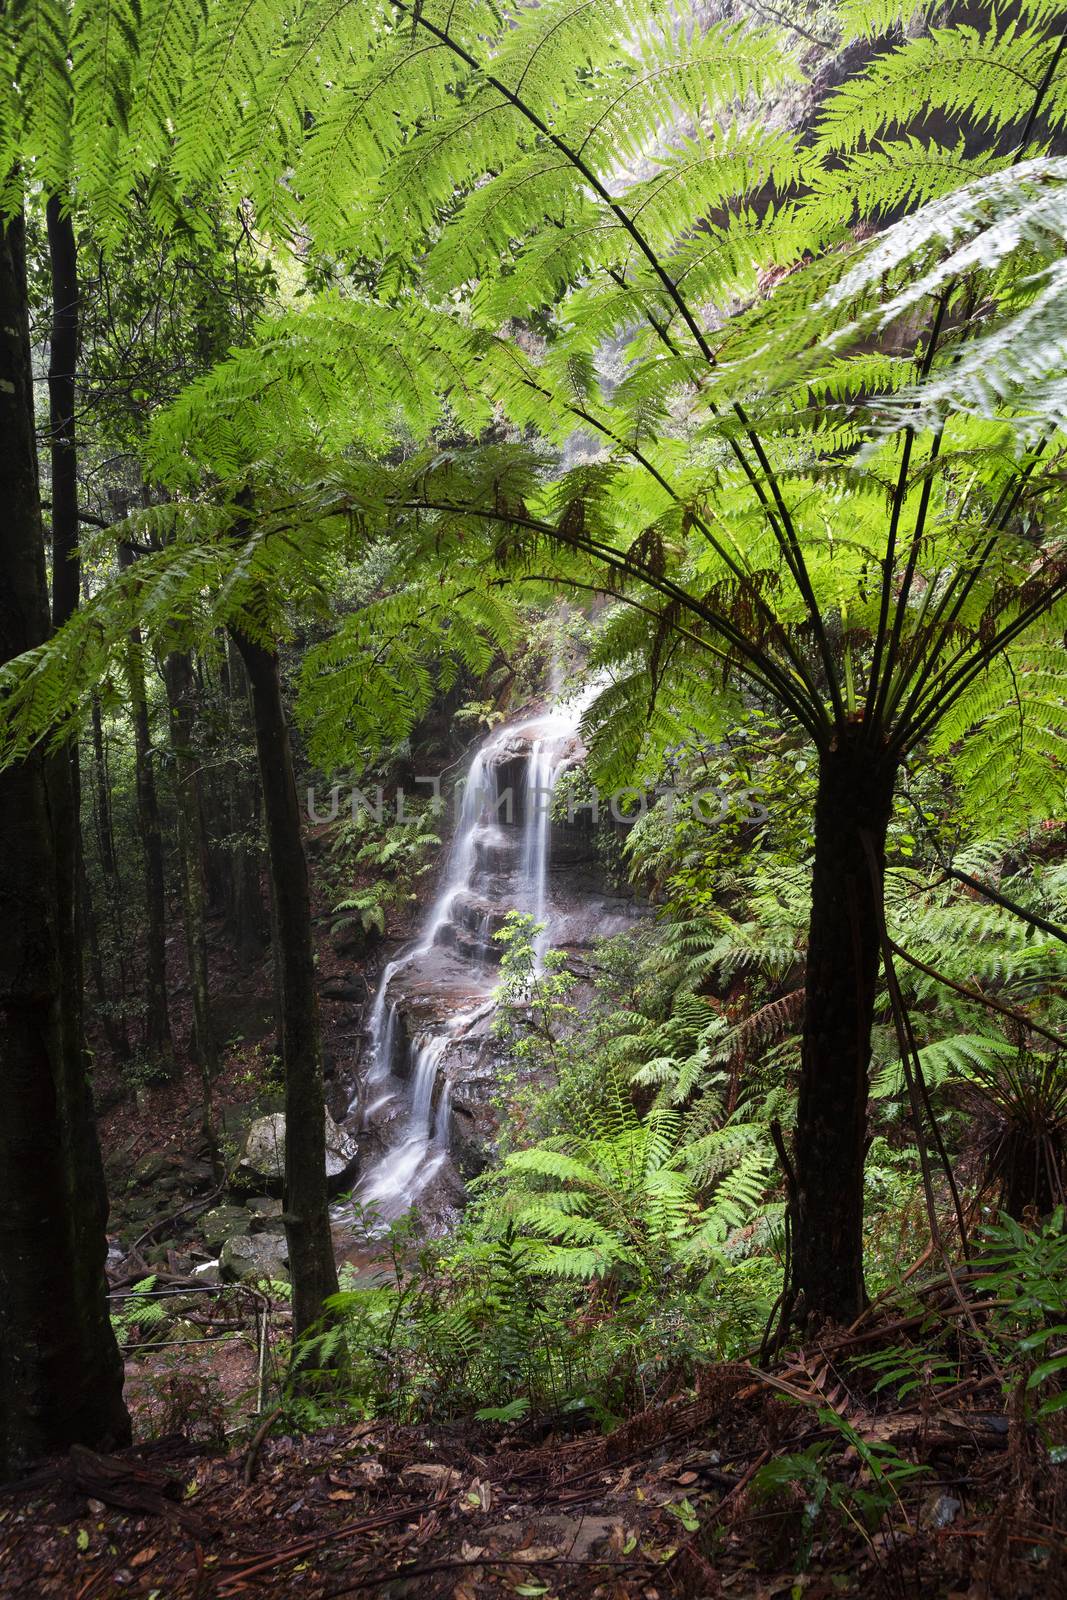 Views to waterfall through large tree ferns by lovleah